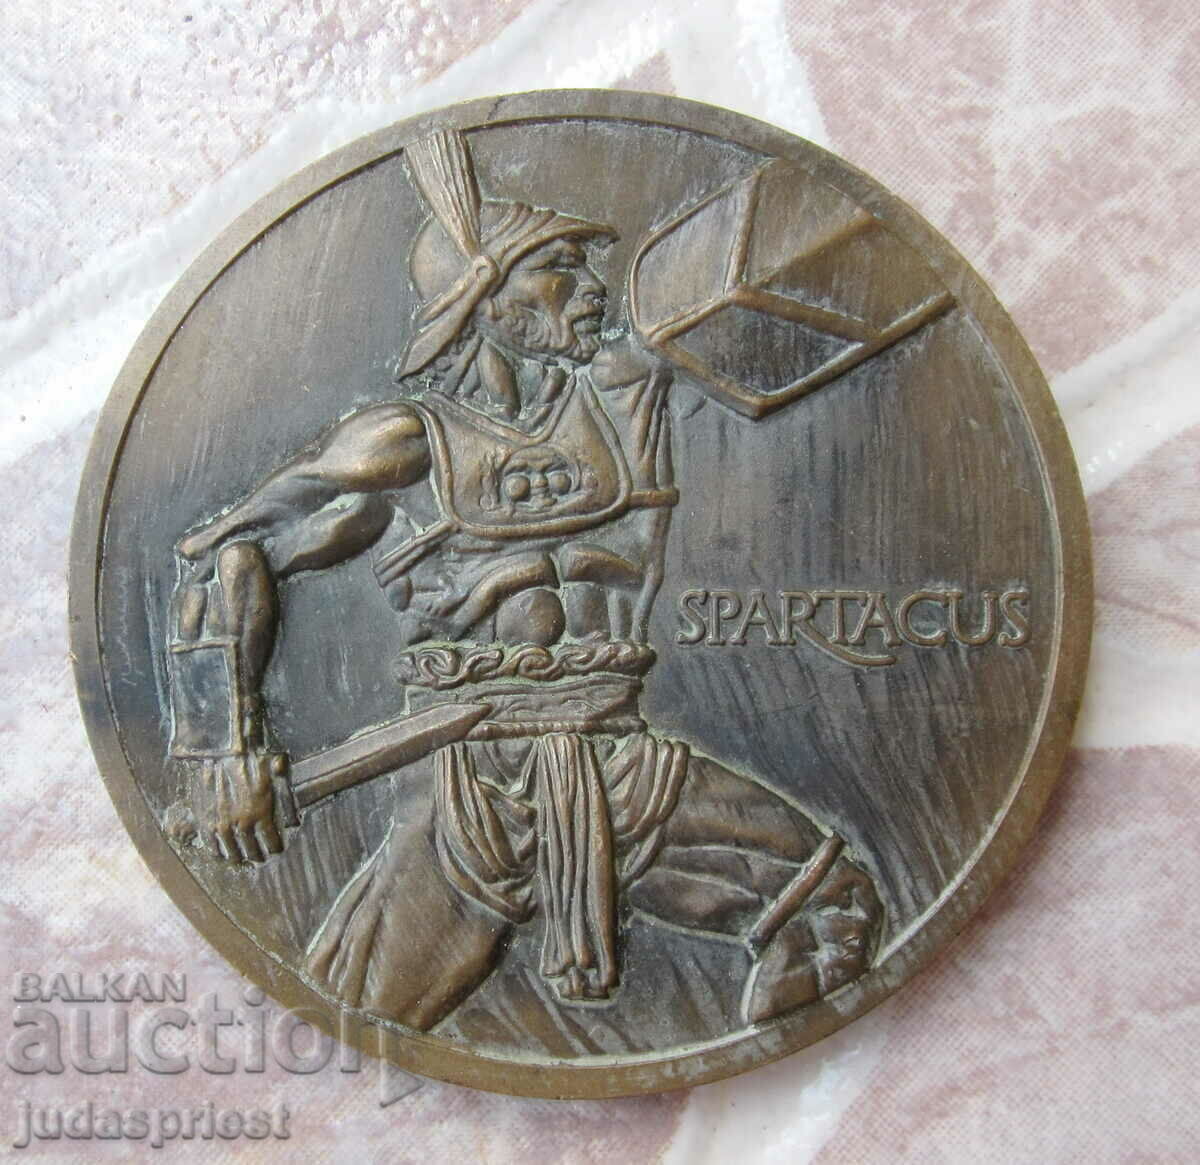 rare Bulgarian medal plaque 2050 from the Spartacus uprising